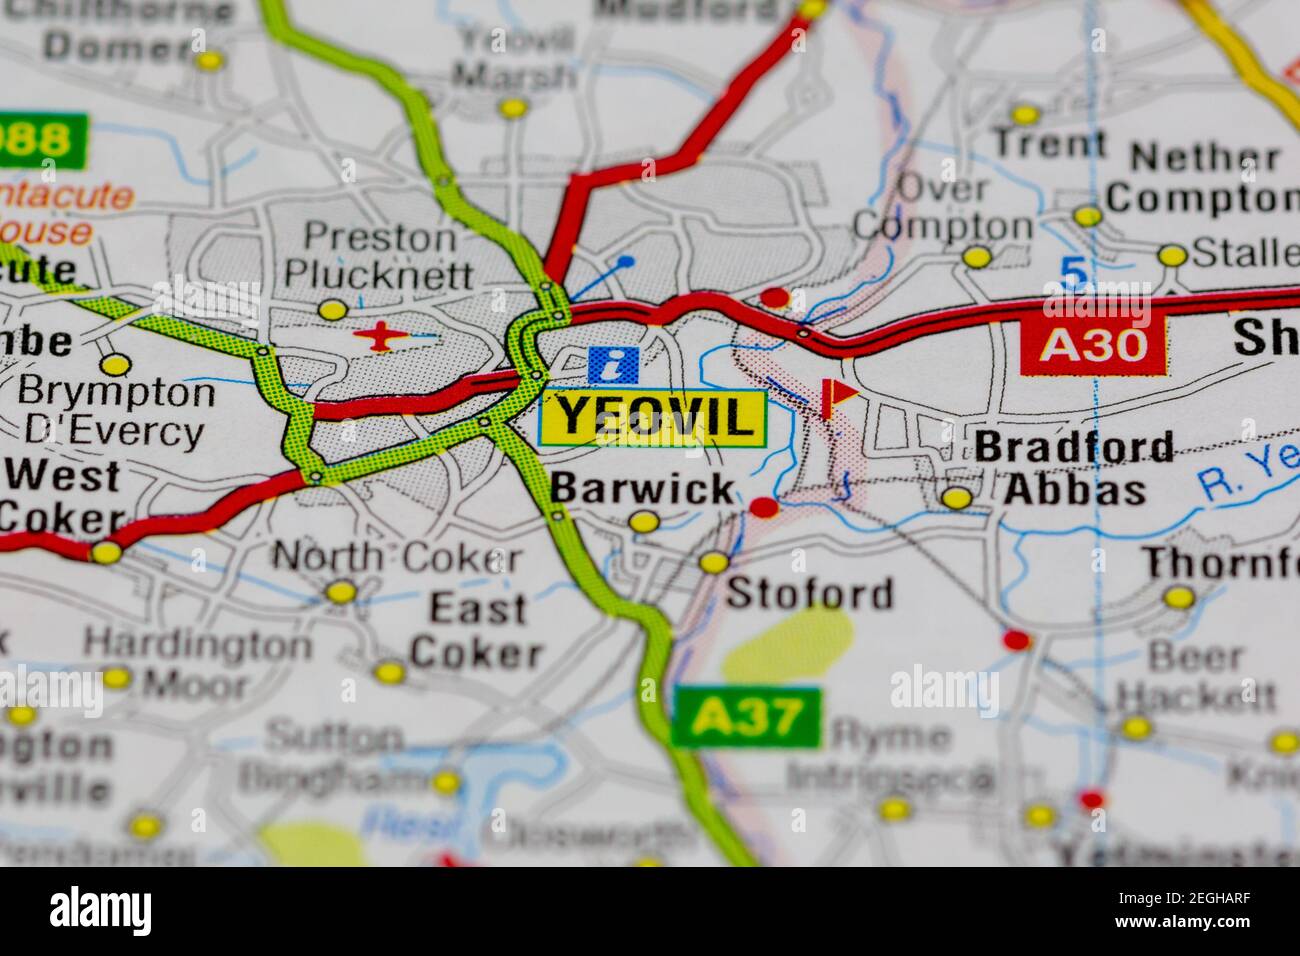 Yeovil and surrounding areas shown on a road map or geography map Stock Photo